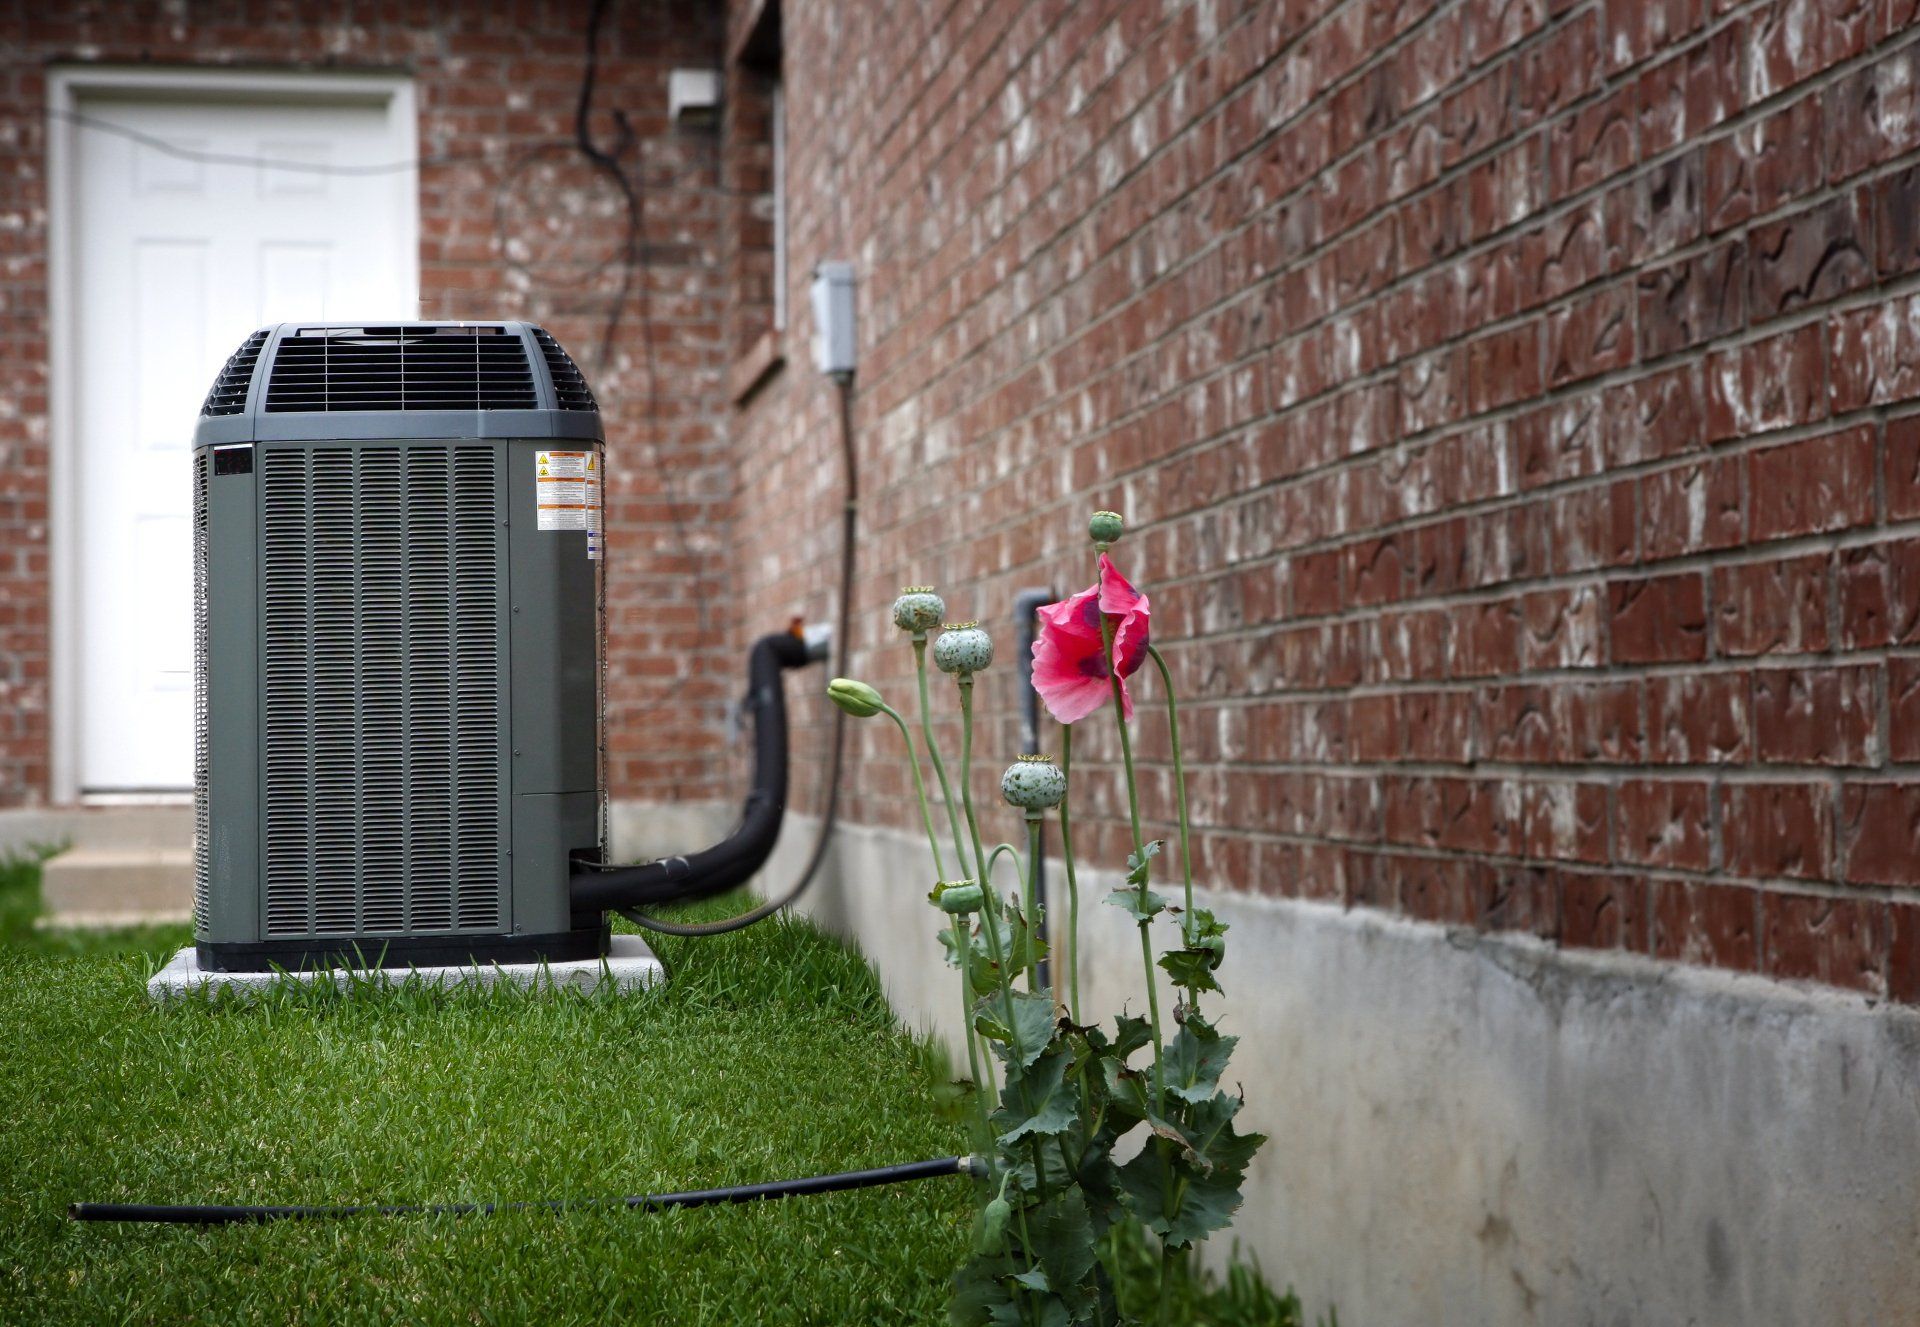 Air Conditioning Unit with Bright Pink Flower